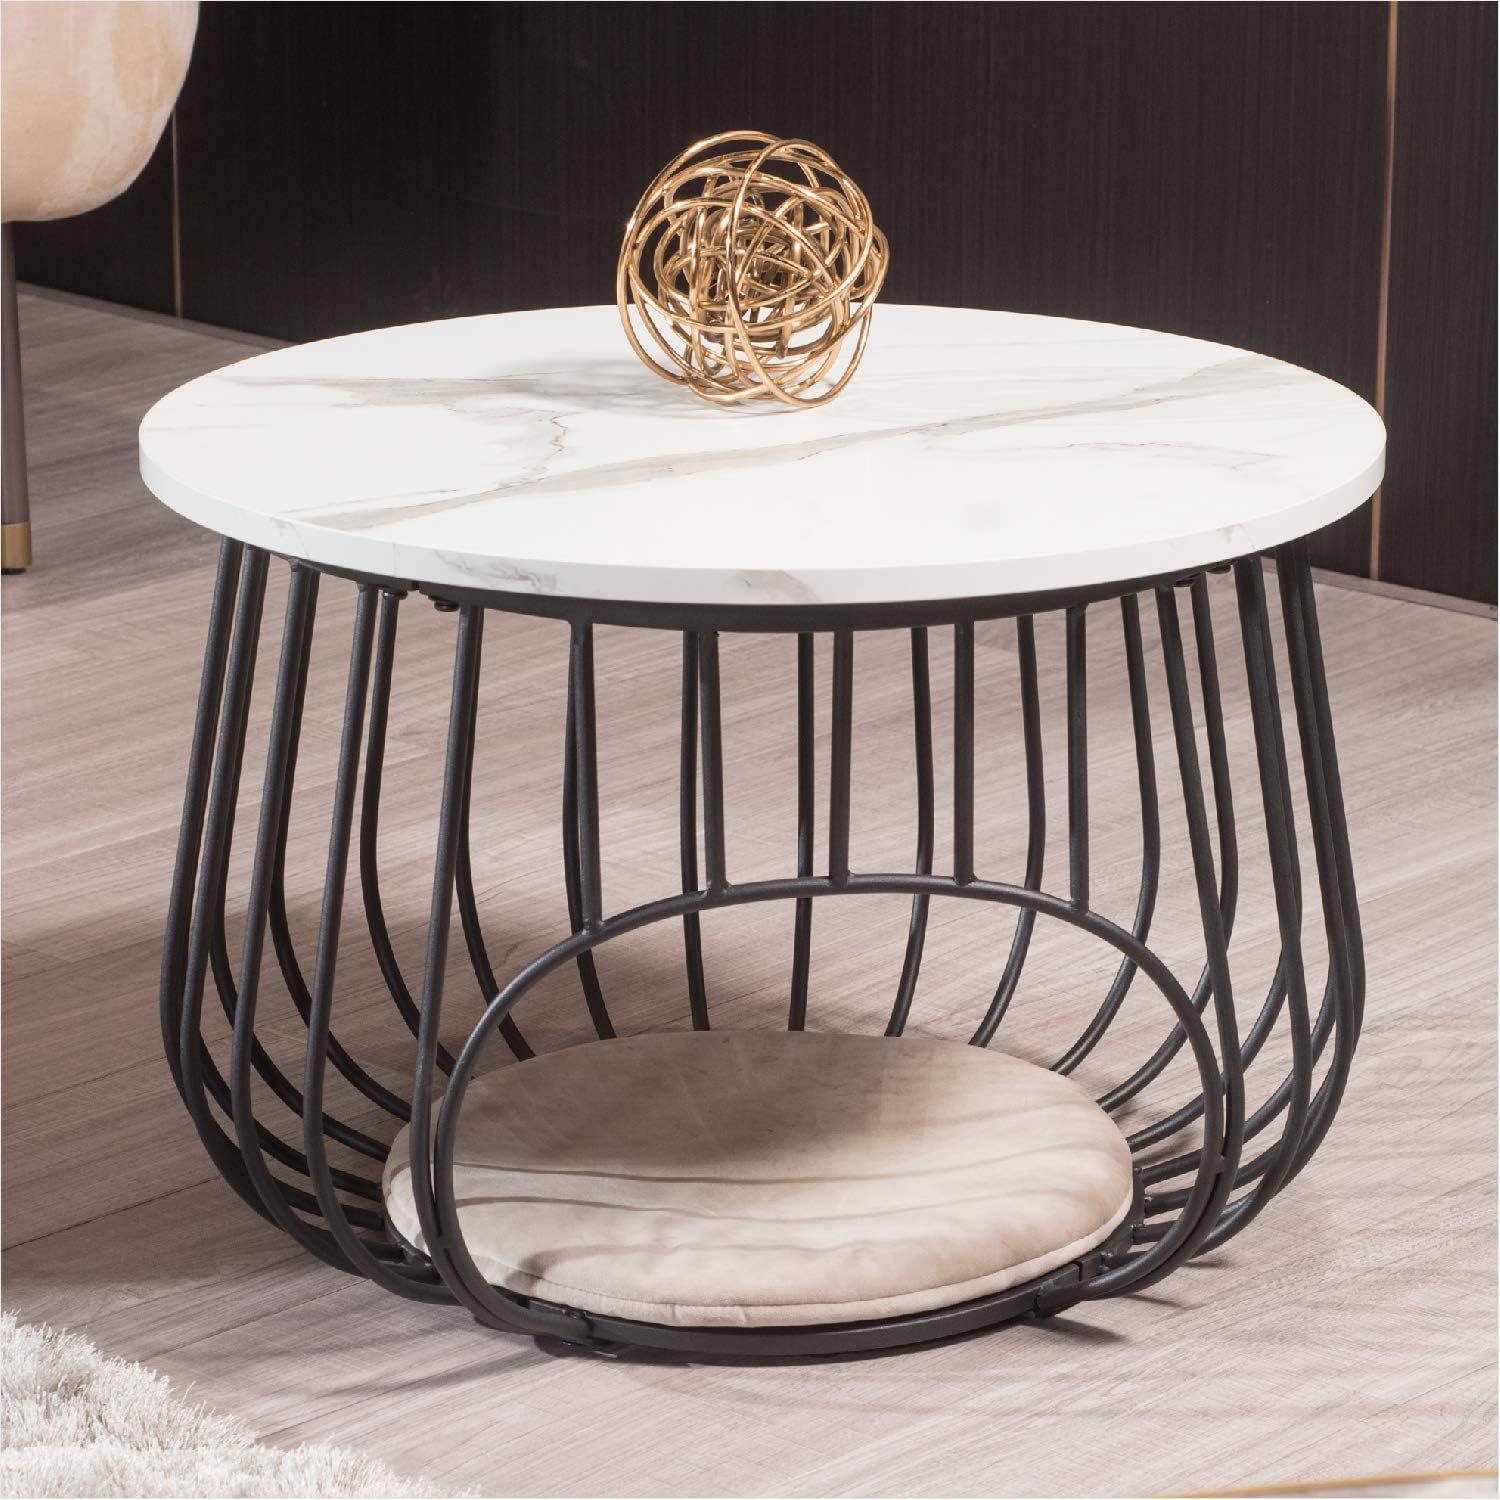 Moncot 22" Round Coffee Table,Cocktail Table MDF Top White Marble Pattern Black Metal Frame,Modern Coffee Table with Openning Cat House for Living Room(White Marble Black)